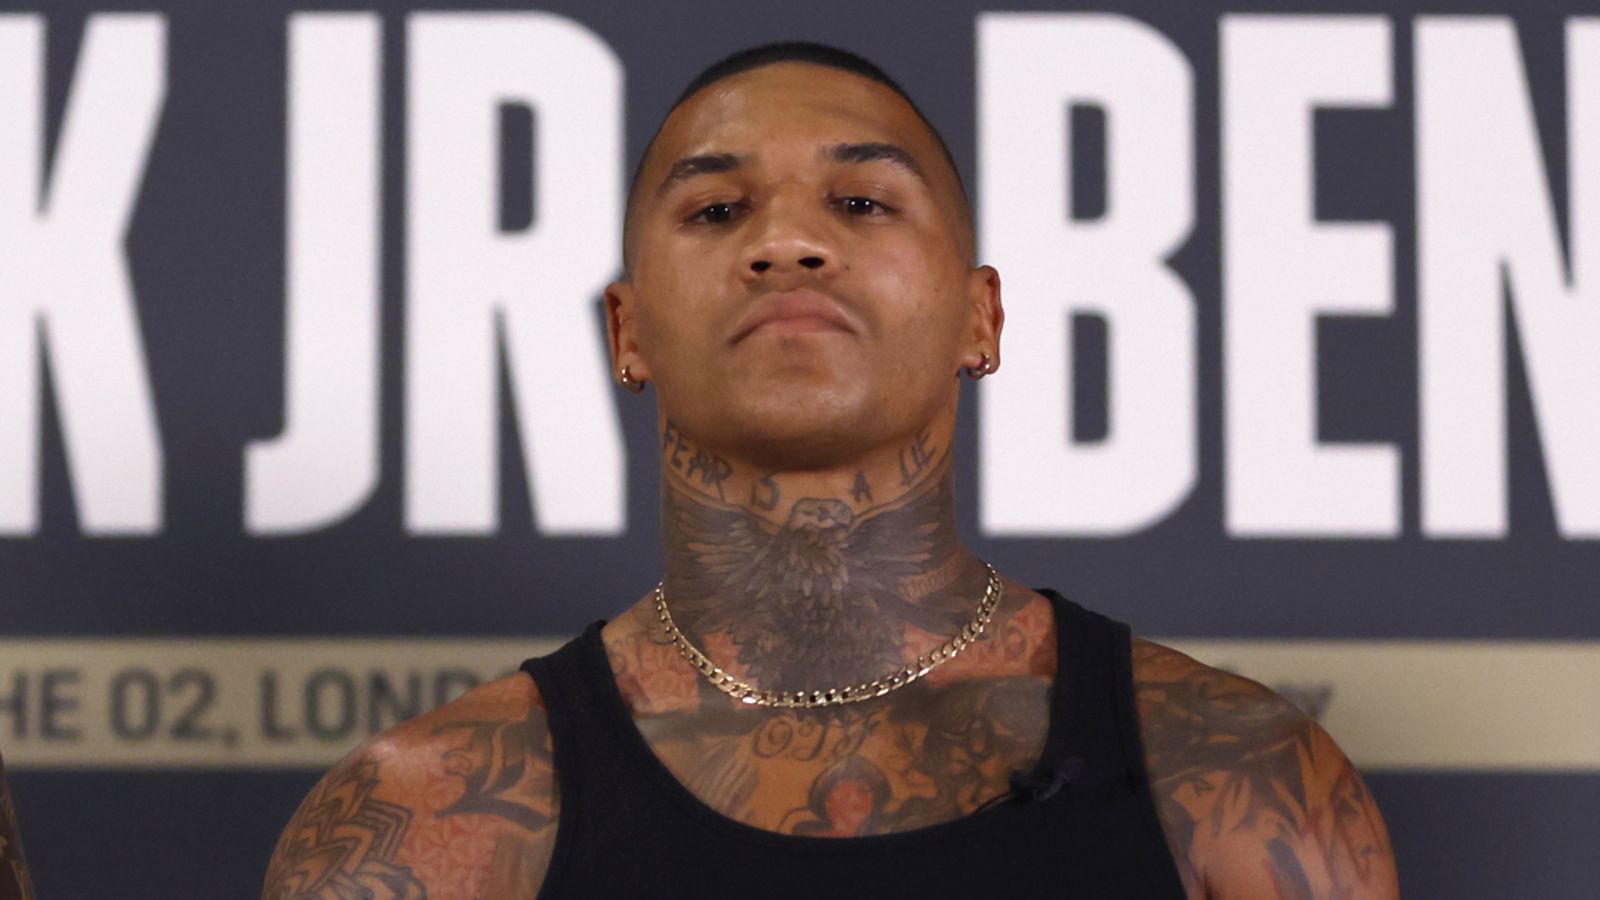 Conor Benn to return to WBC rankings as ‘highly-elevated consumption of eggs’ explanation for failed drugs test | Boxing News